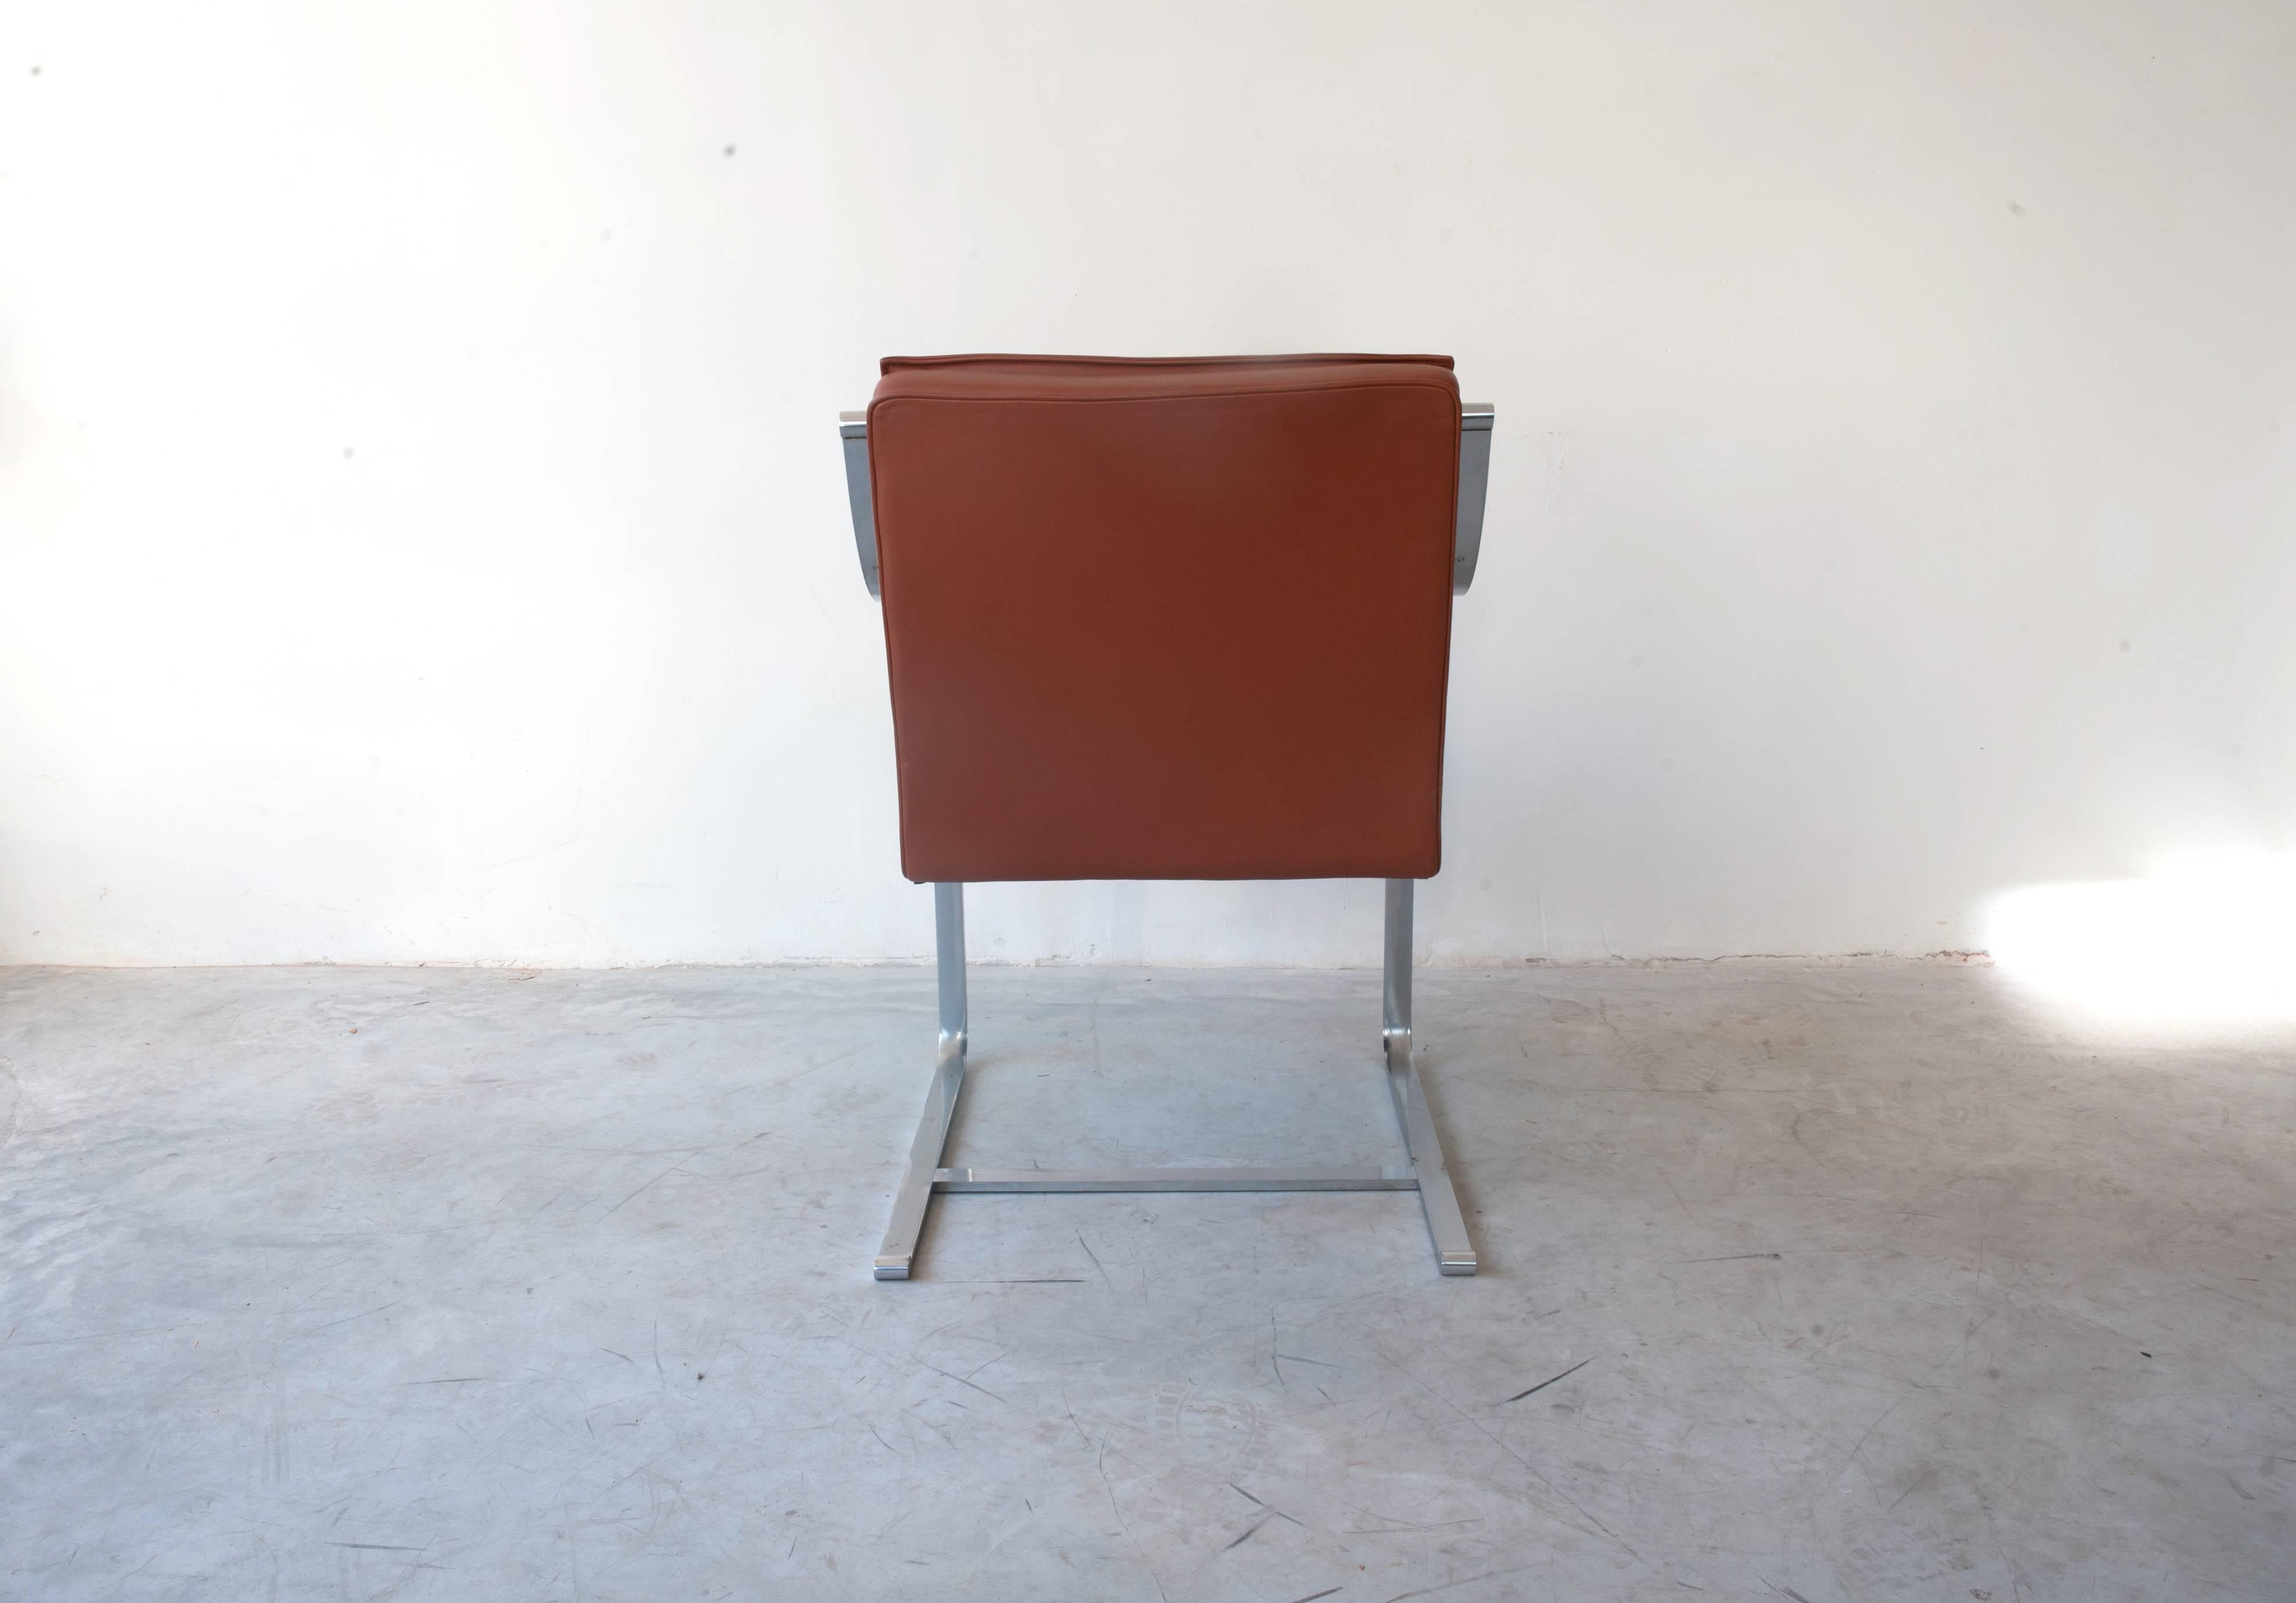 A beautiful brown leather armchair designed by Rudolf Bernd Glatzel for Walter Knoll, from the Art collection series.
Structure made of heavy stainless steel, brushed frame and original upholstered with soft high quality brown leather. Very